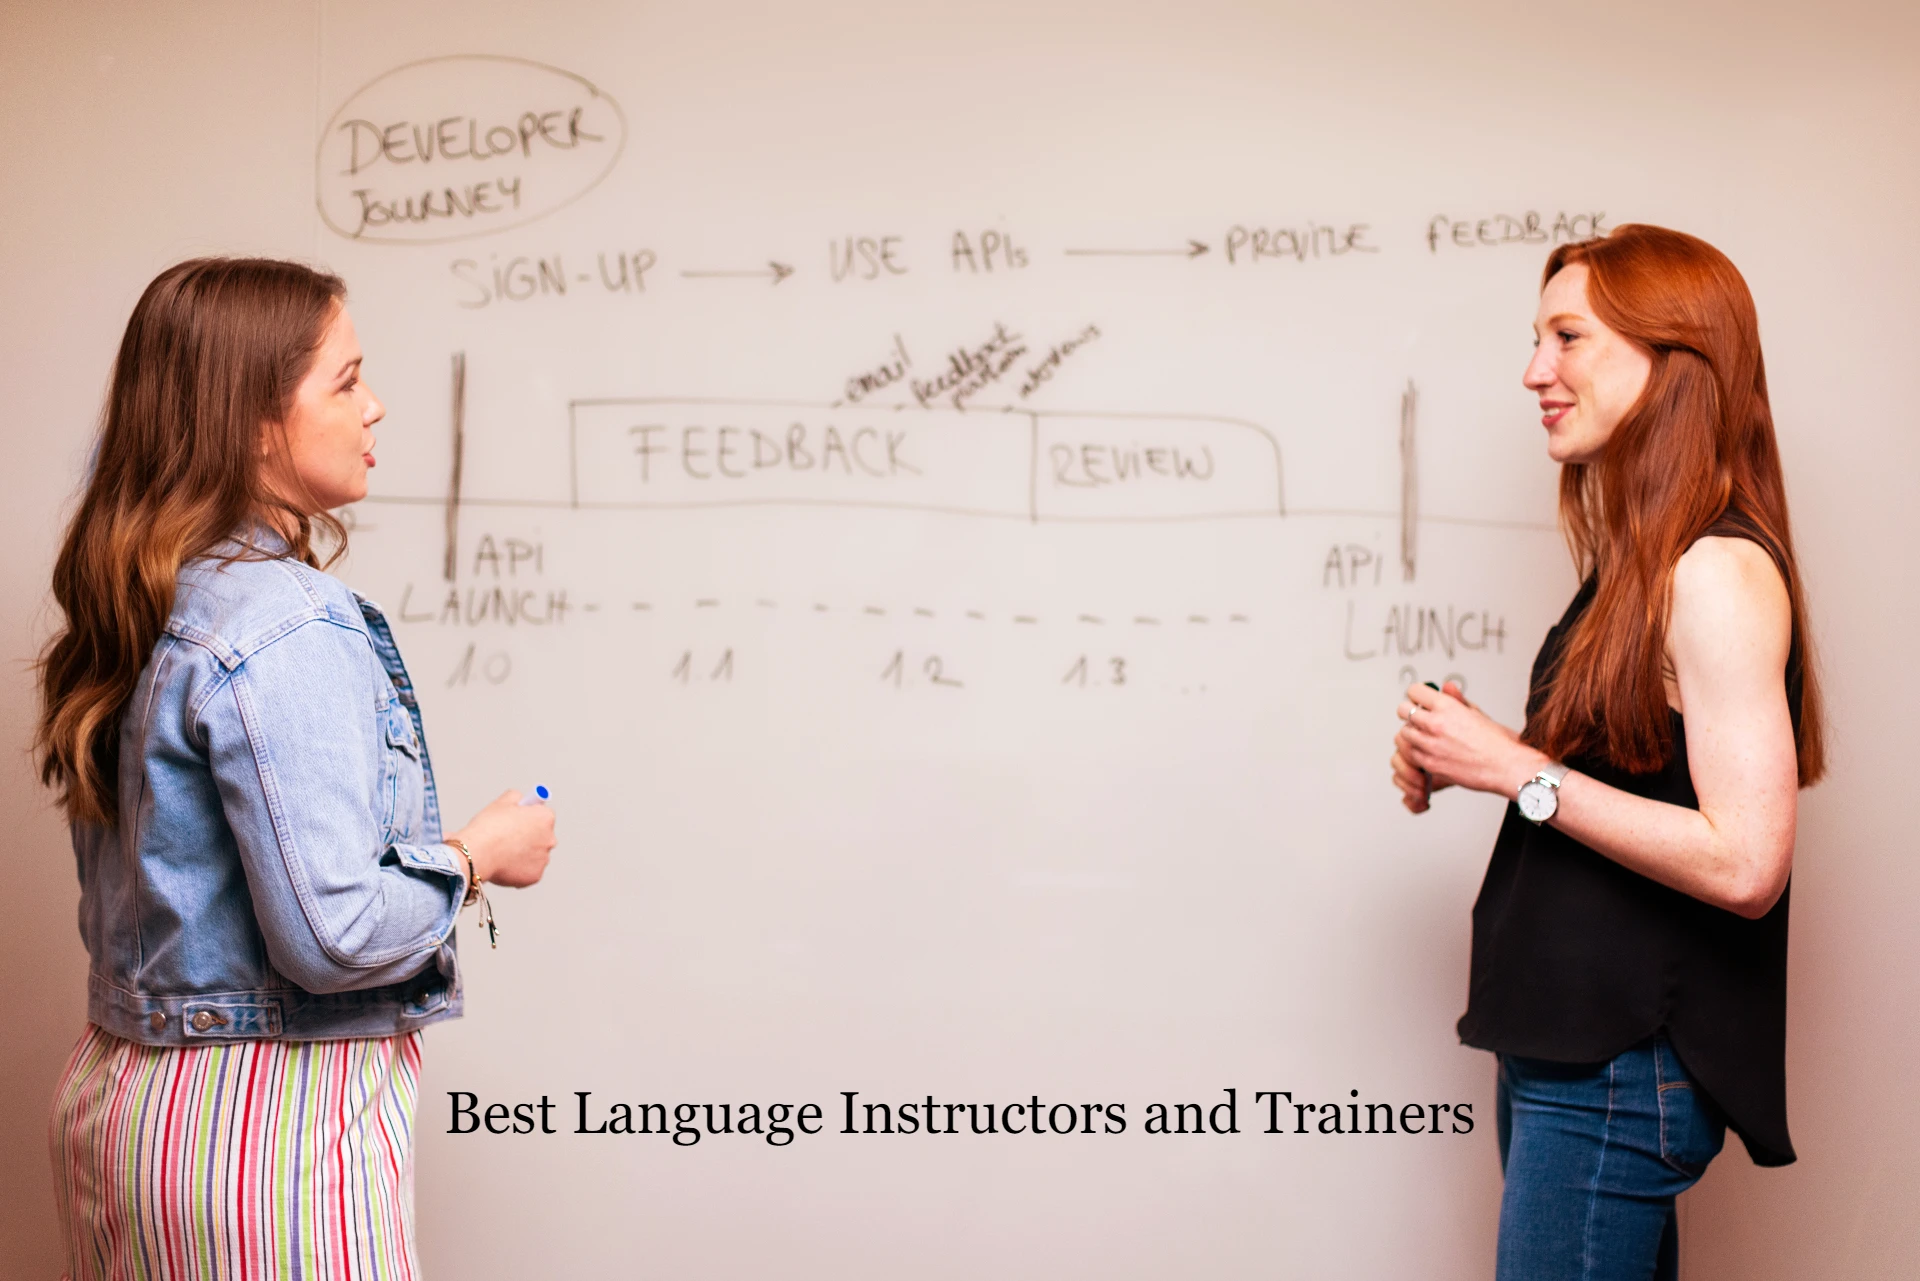 Best Language Instructors and Trainers